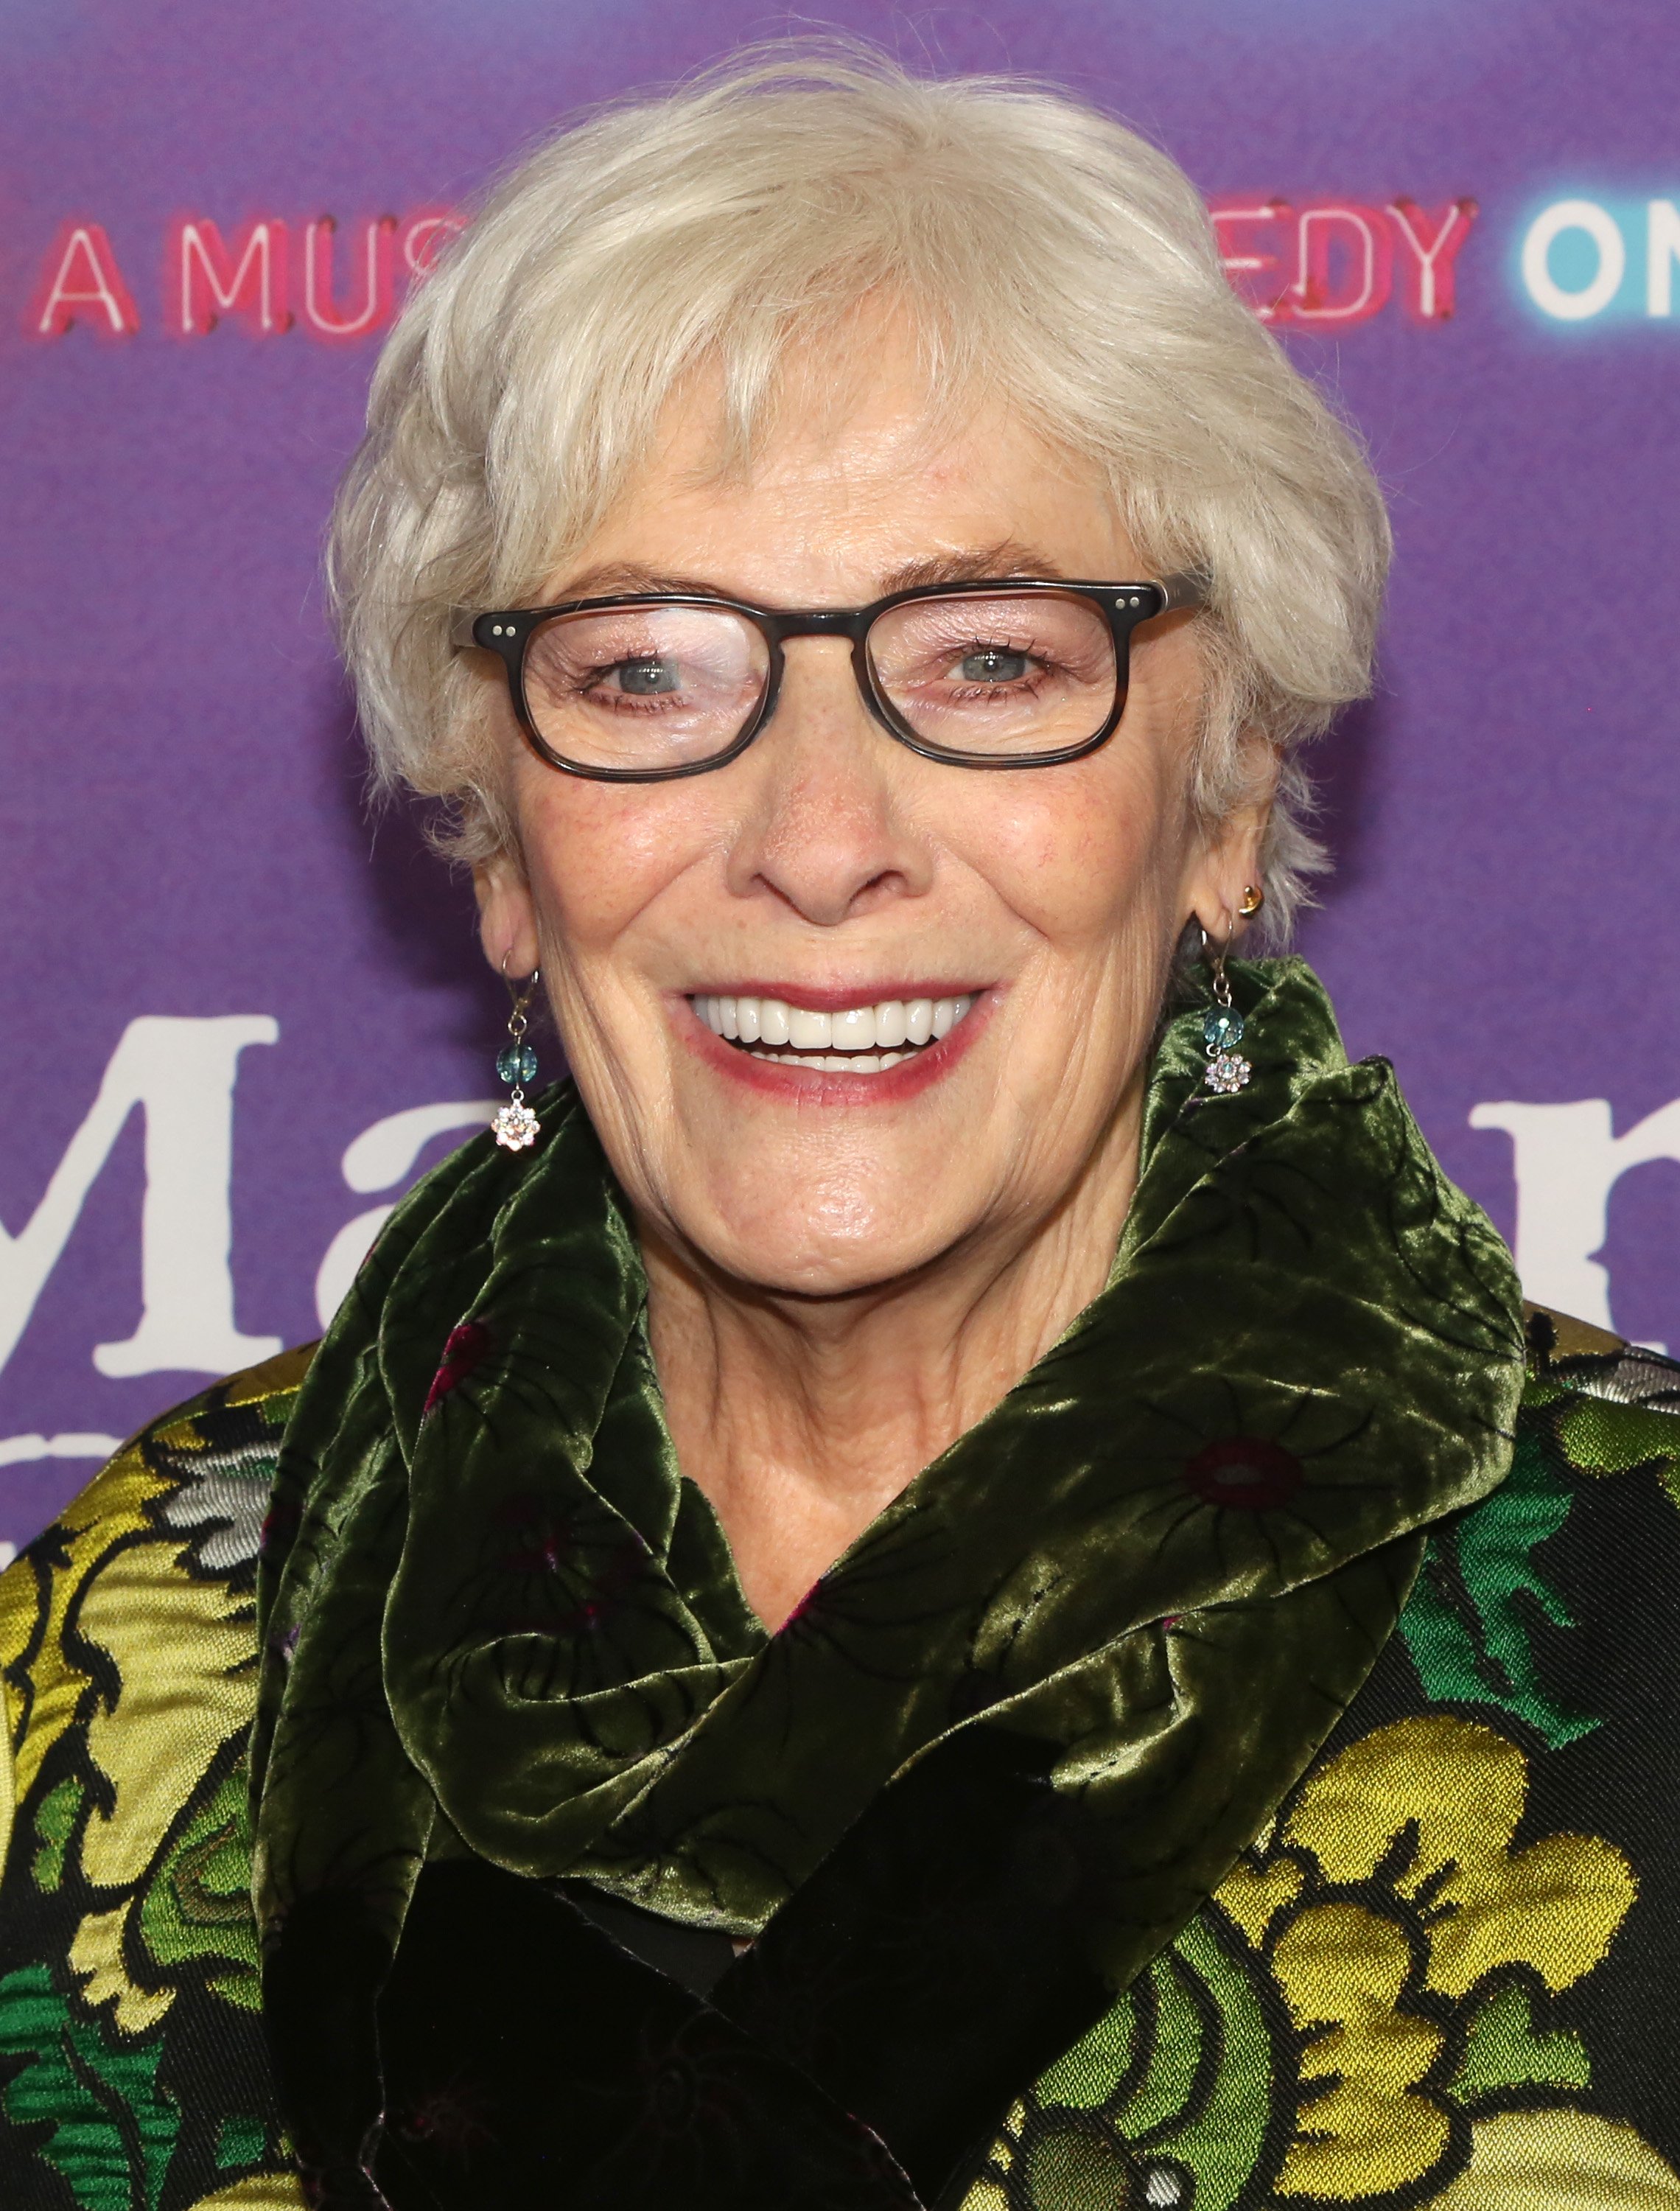 Betty Buckley poses at the opening night for Stephen Sondheim's "Company" on Broadway at The Bernard B. Jacobs Theatre on December 9, 2021 in New York City. | Source: Getty Images